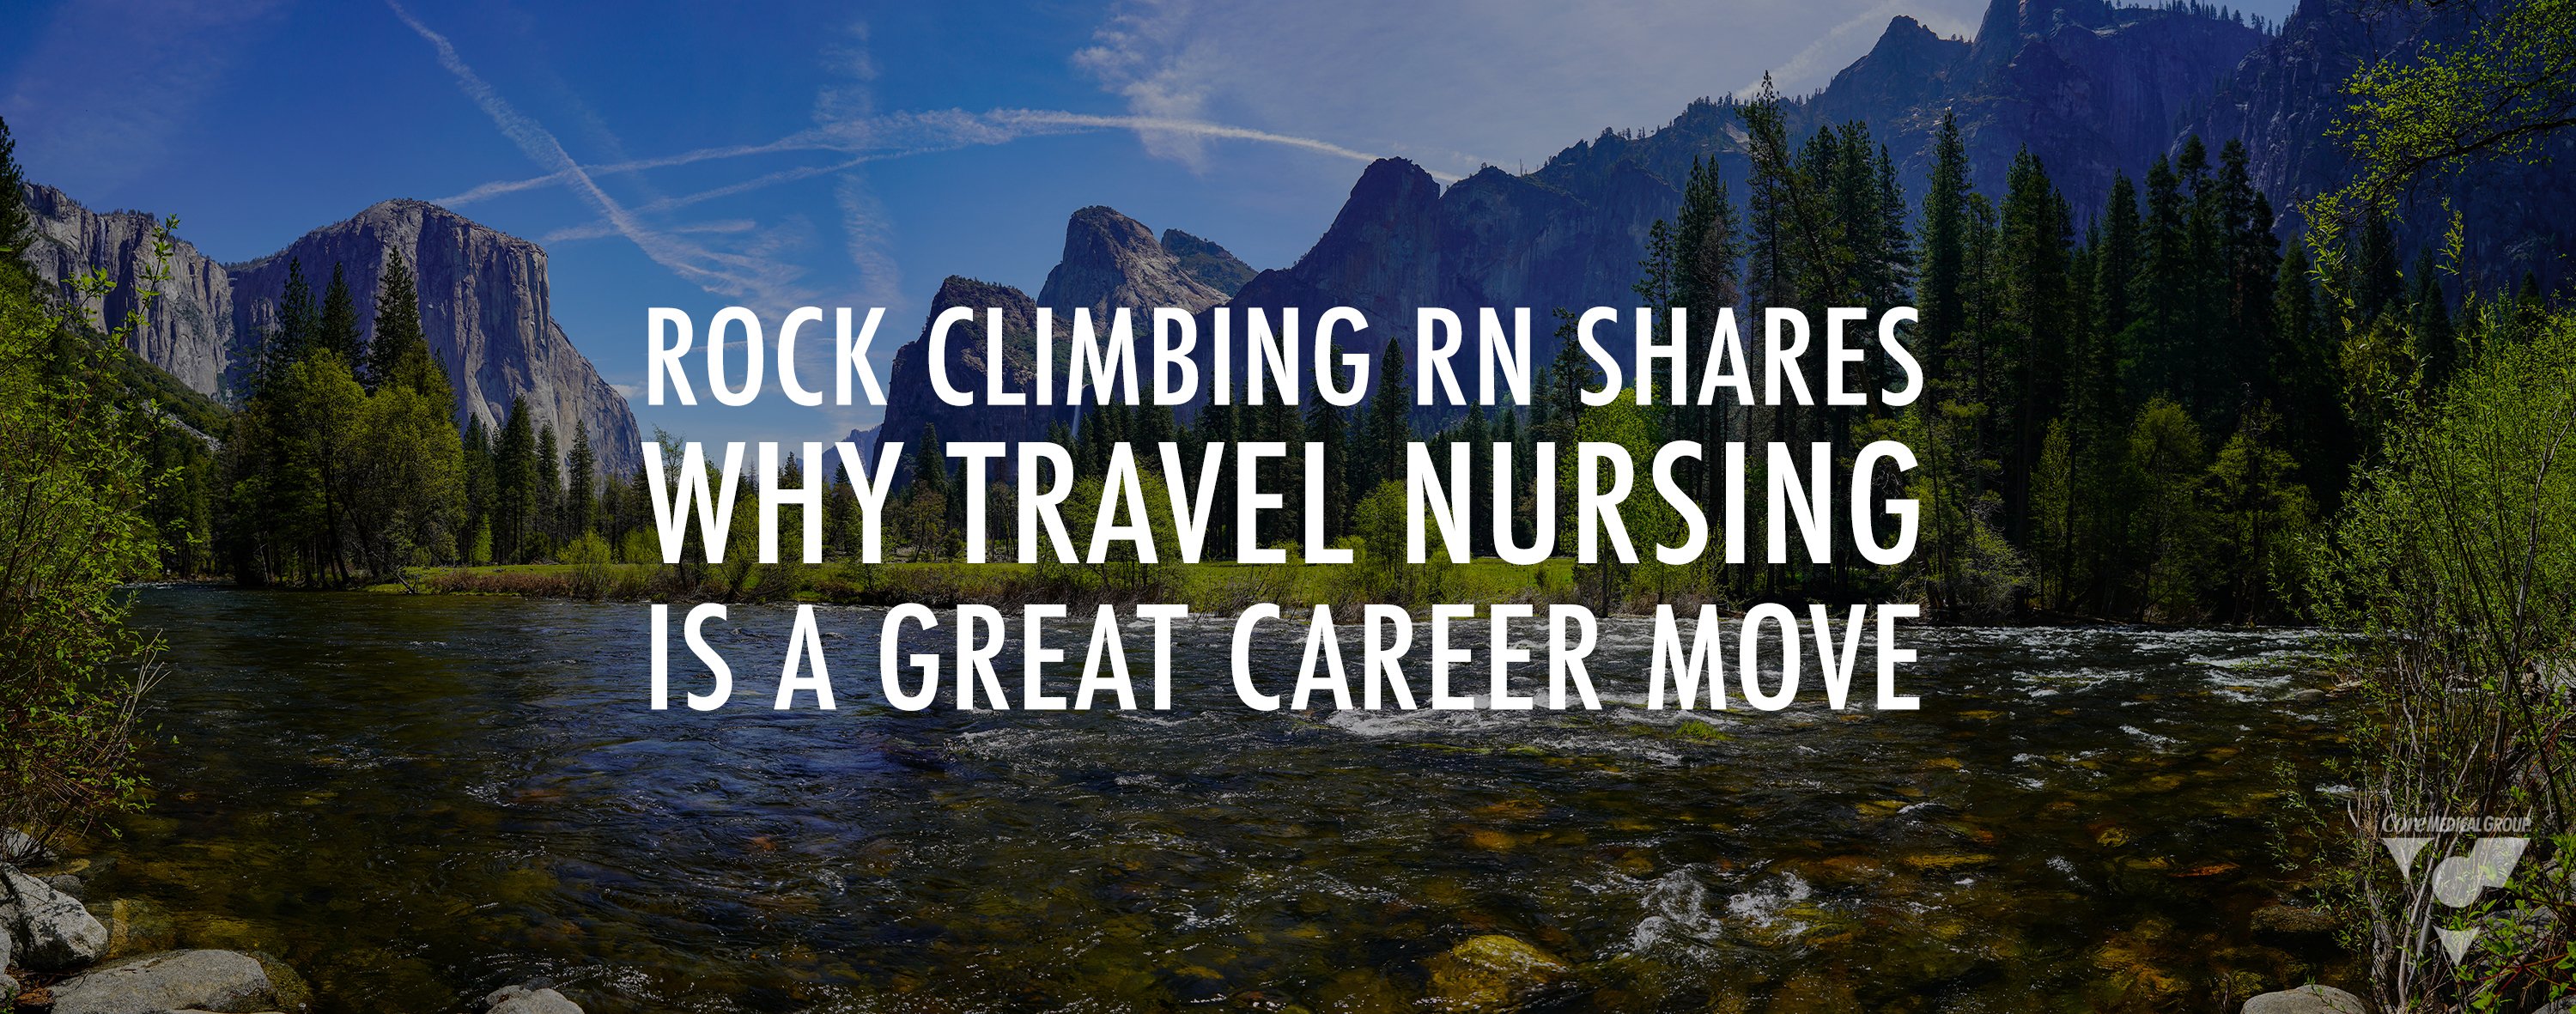 CMG_Blog_Featuredimages_Rock Climbing RN Shares Why Travel Nursing is a Great Career Move_R1_Blog